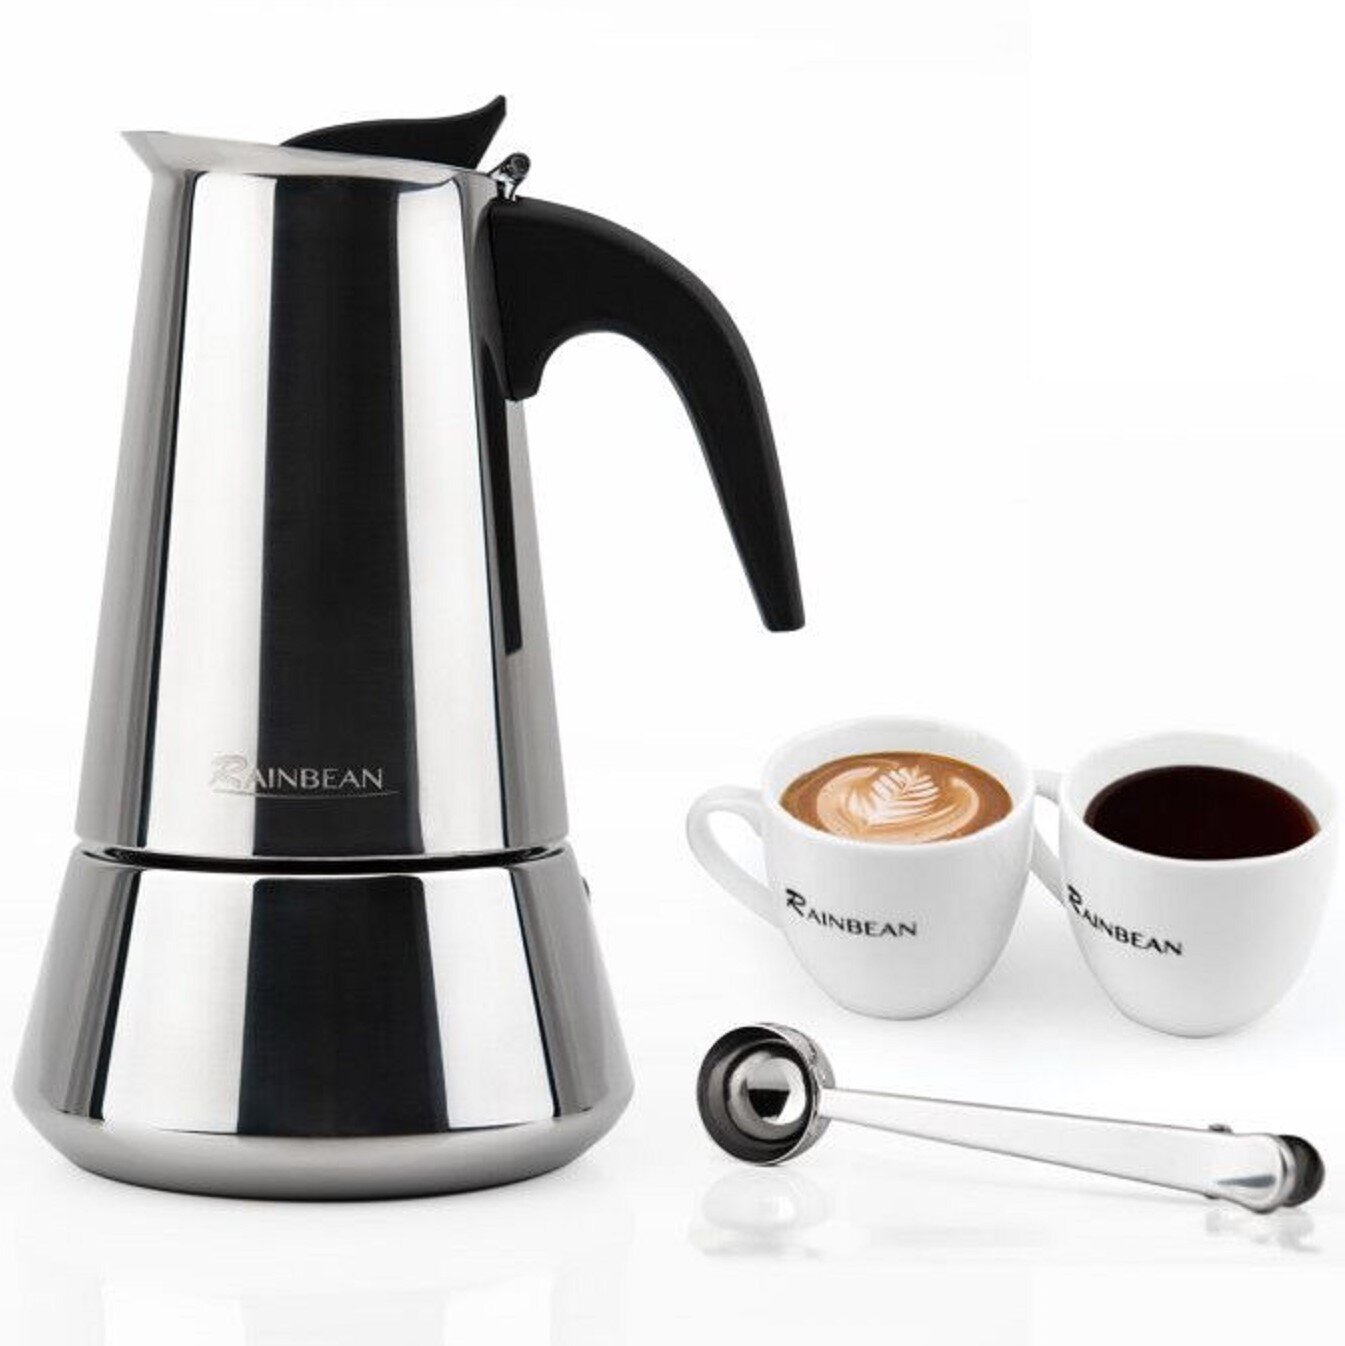 Stainless Steel Moka Coffee Maker Mocha Espresso Latte Stovetop Filter Coffee Pot Percolator Tools Easy Clean for Home Office (100ml), Size: 5.51 x